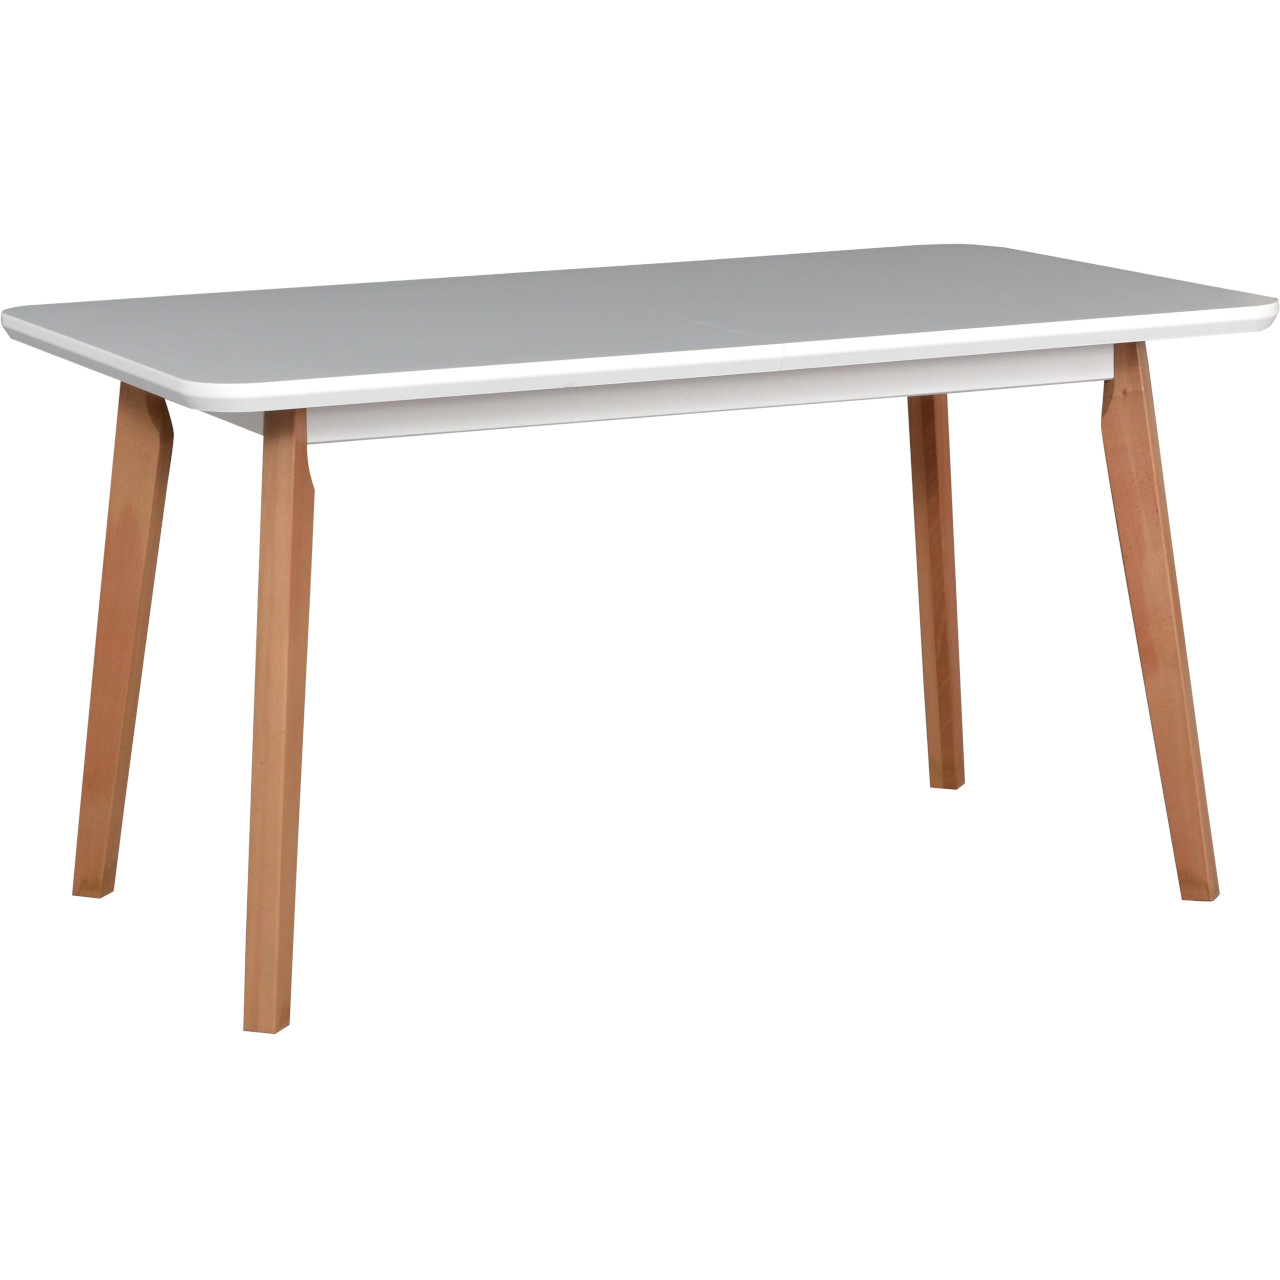 Table OSLO 7 80x140/180 white MDF / natural beech